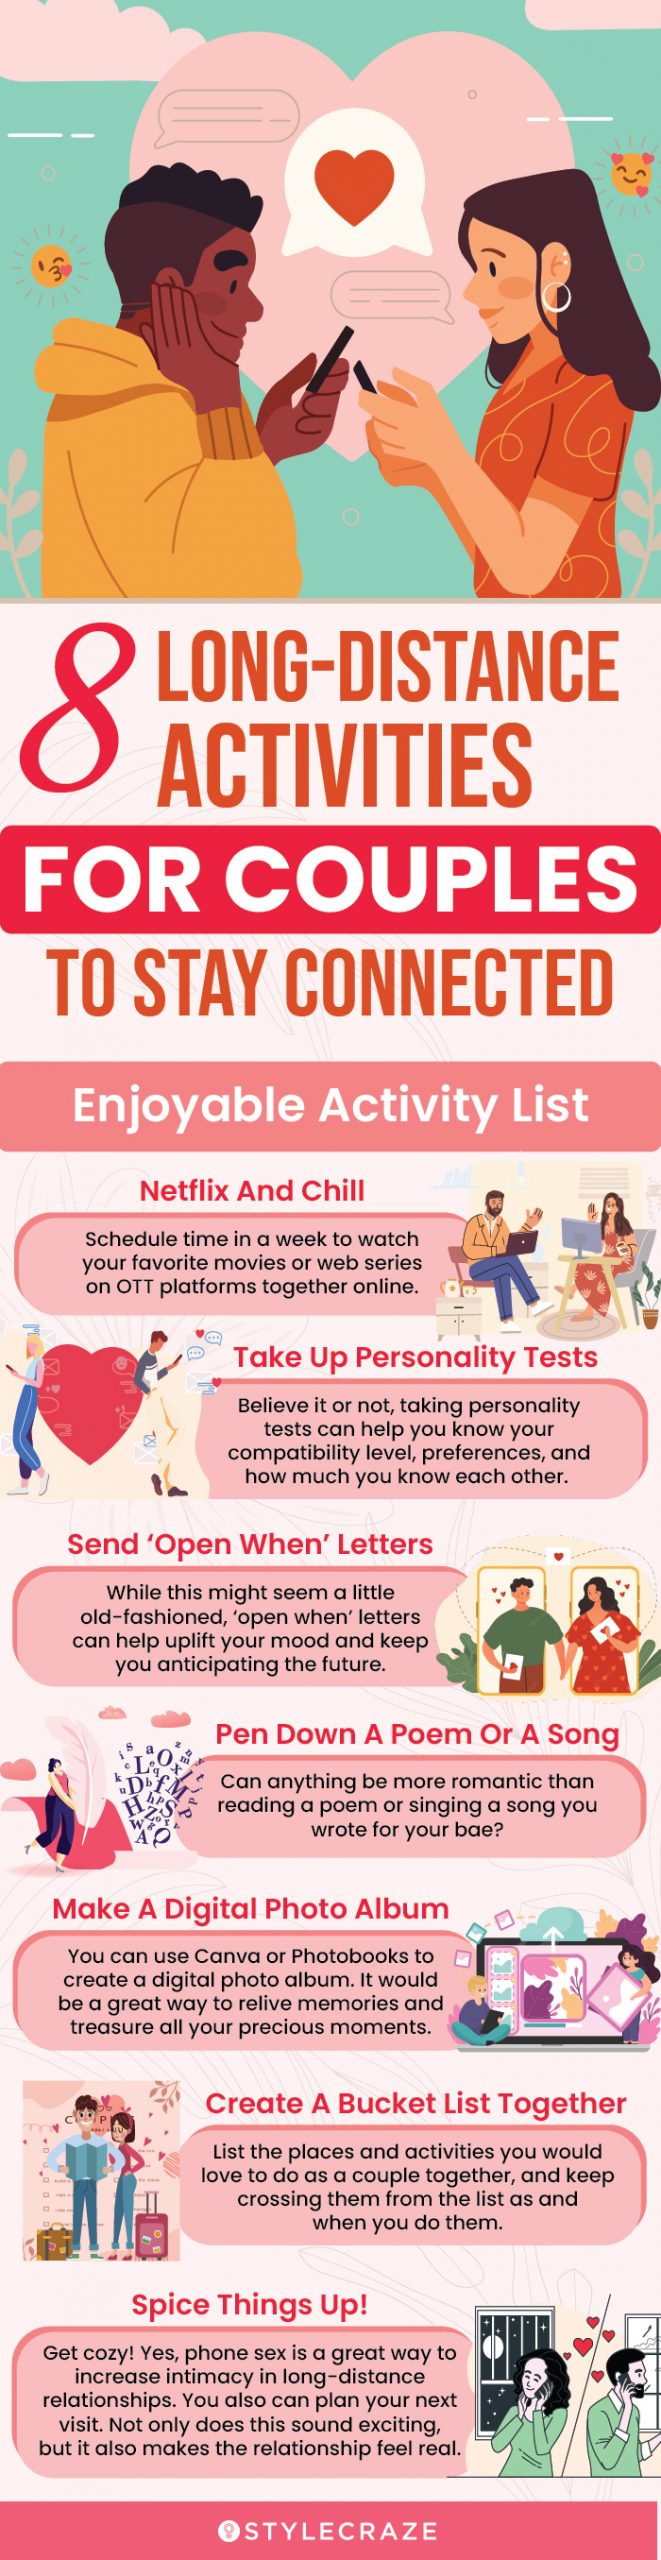 8 longdistance activities for couples to stay connected (infographic)